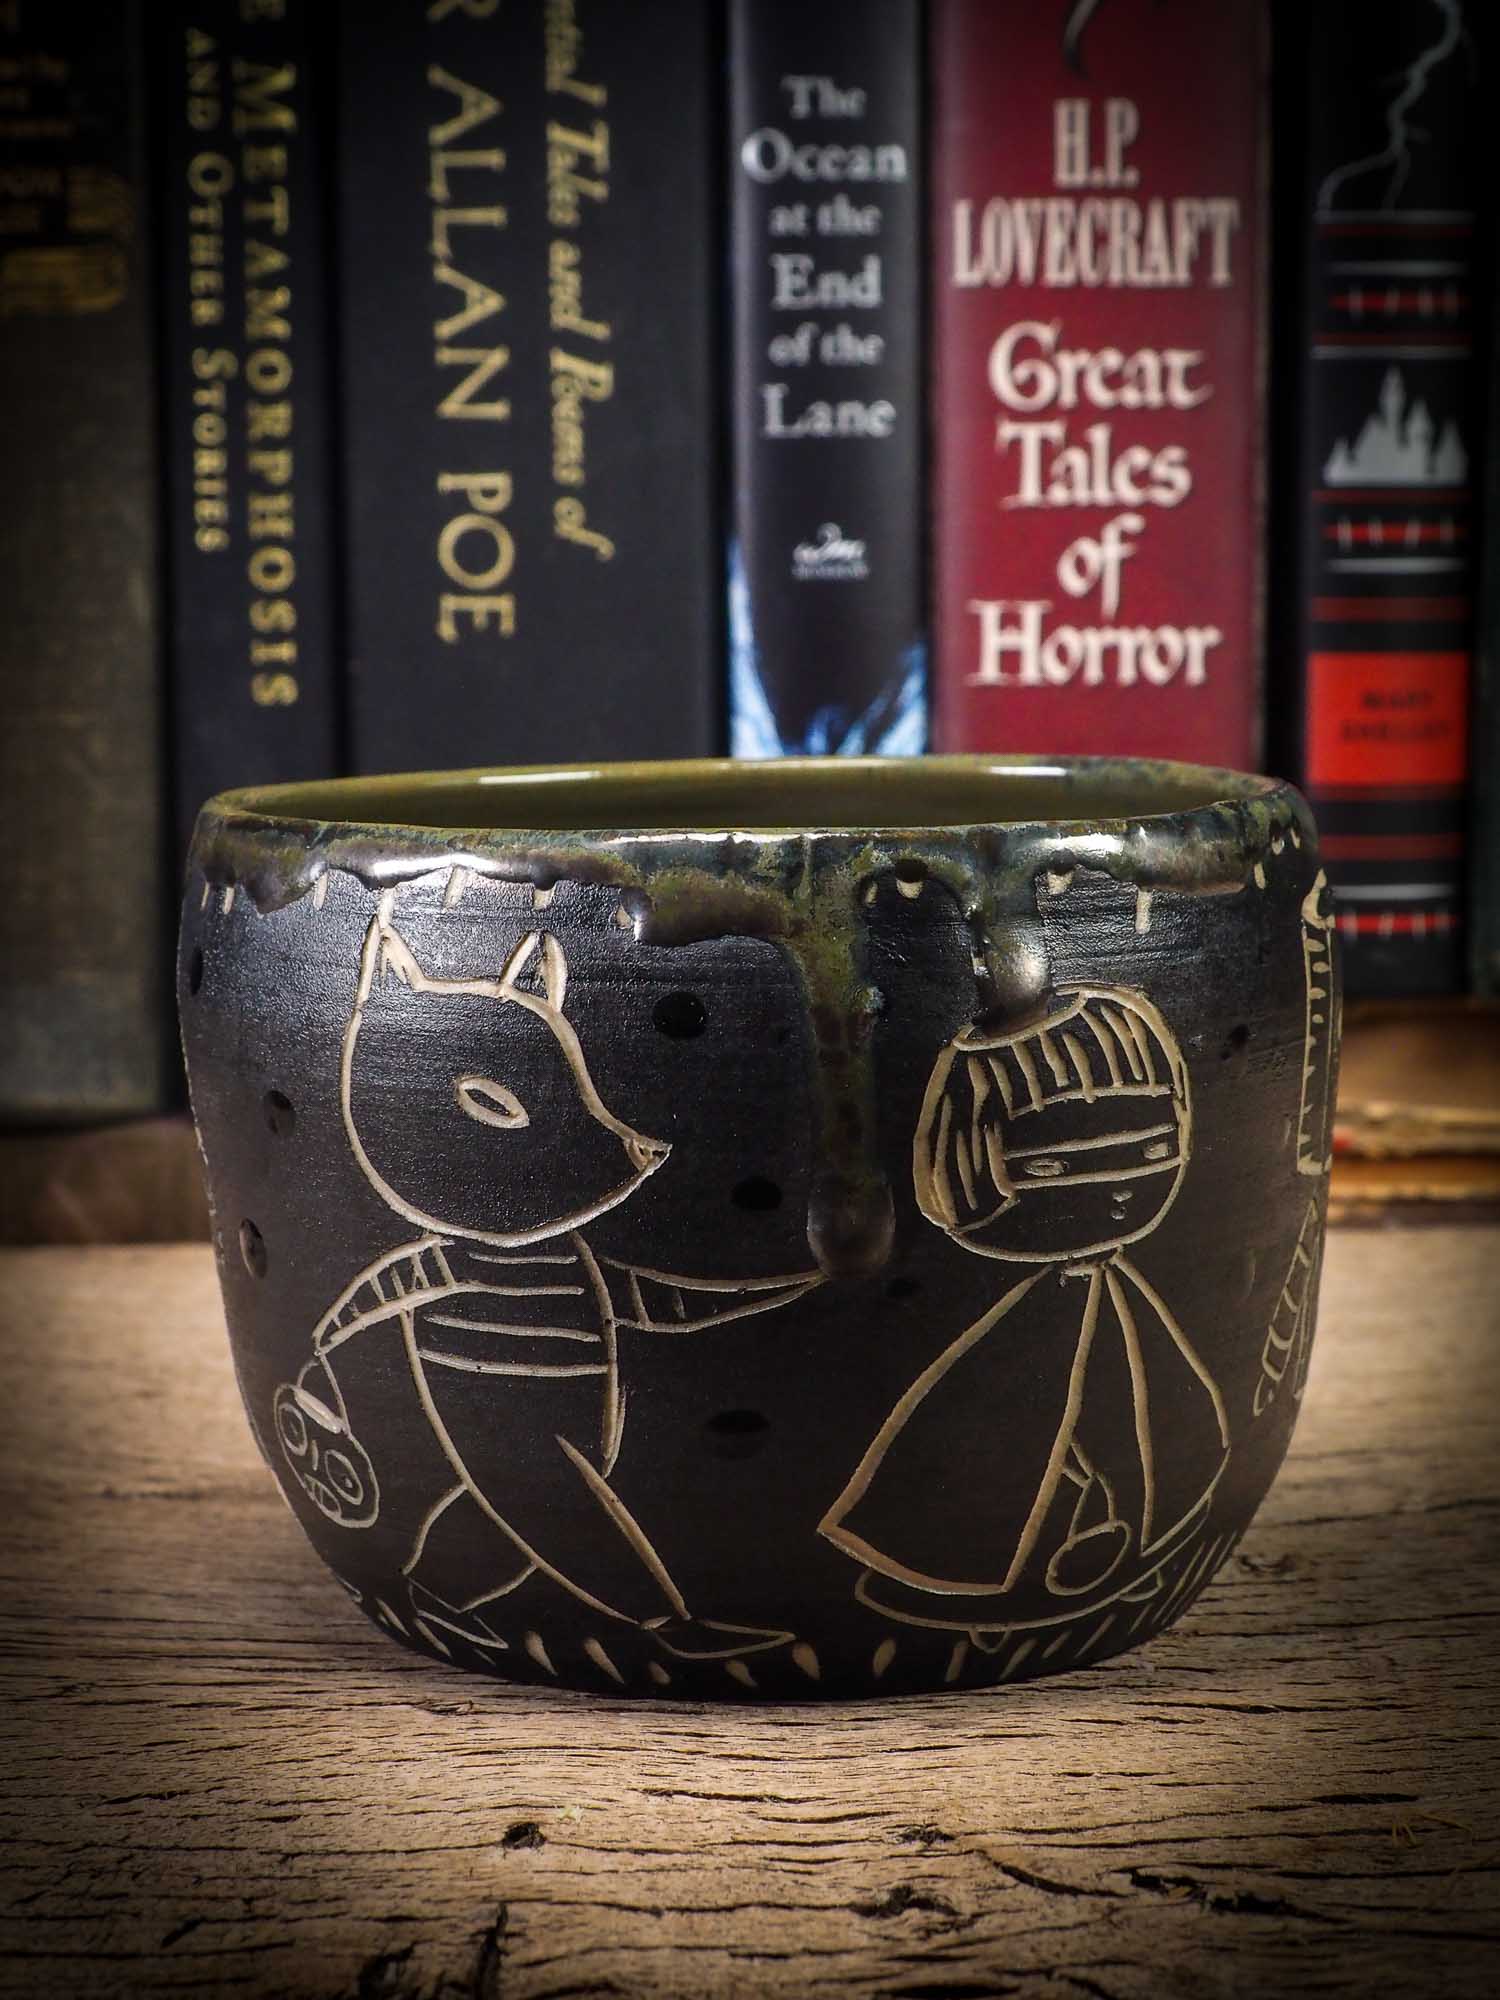 An original Halloween ceramic bowl by Idania Salcido, the artist behind Danita Art. Measures 4 x 4 x 3 Inches, made with wheel thrown clay, hand carved and glazed by the artist. The carved figures give it a nice, folk art primitive feel to it. Perfect for Halloween Candy, ice cream and fruit and as pet cat bowl.